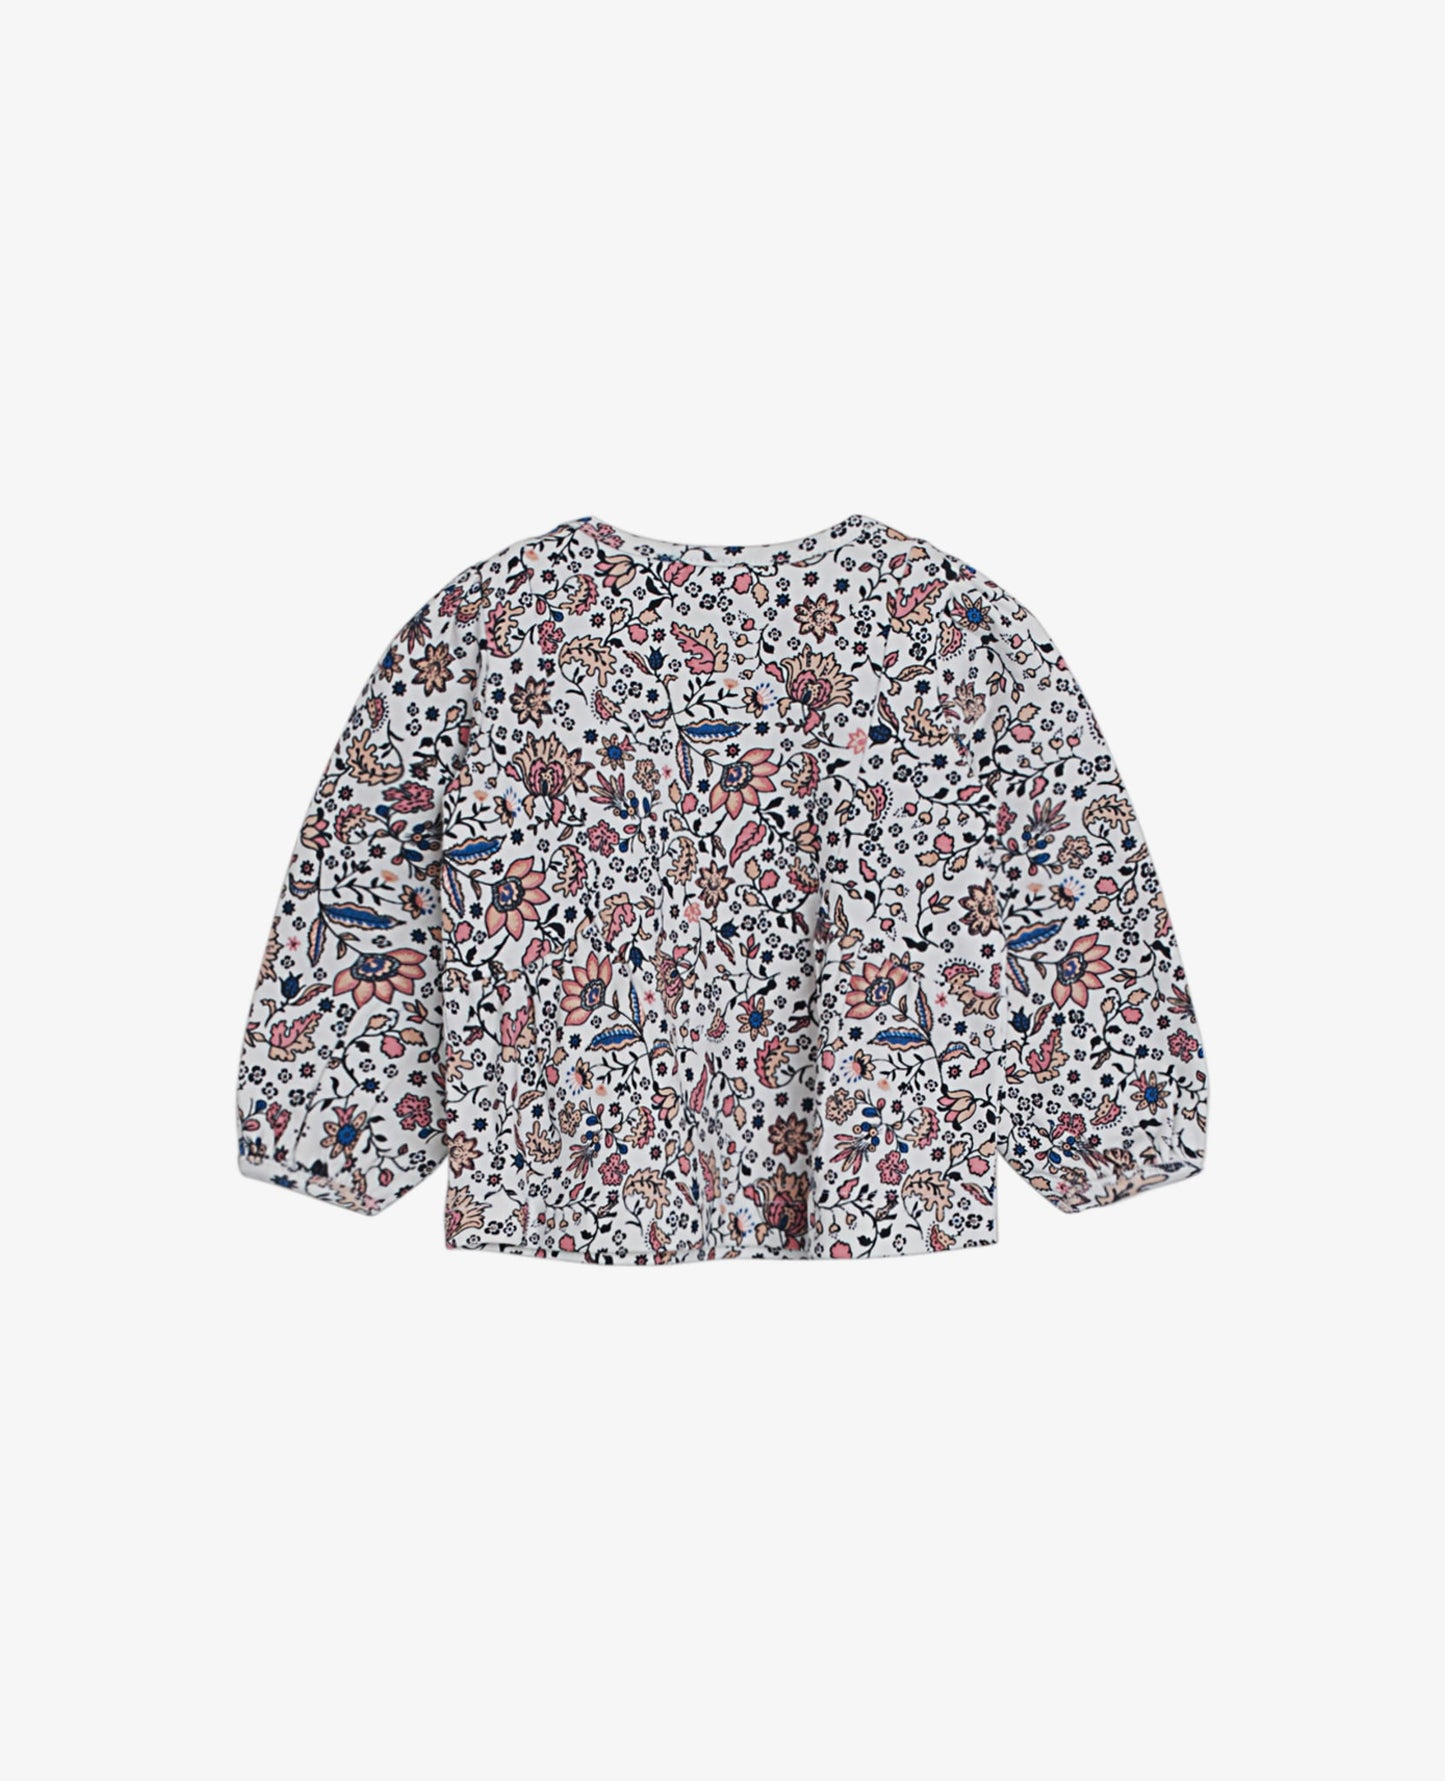 BABY NEW FLORAL JERSEY T-SHIRT